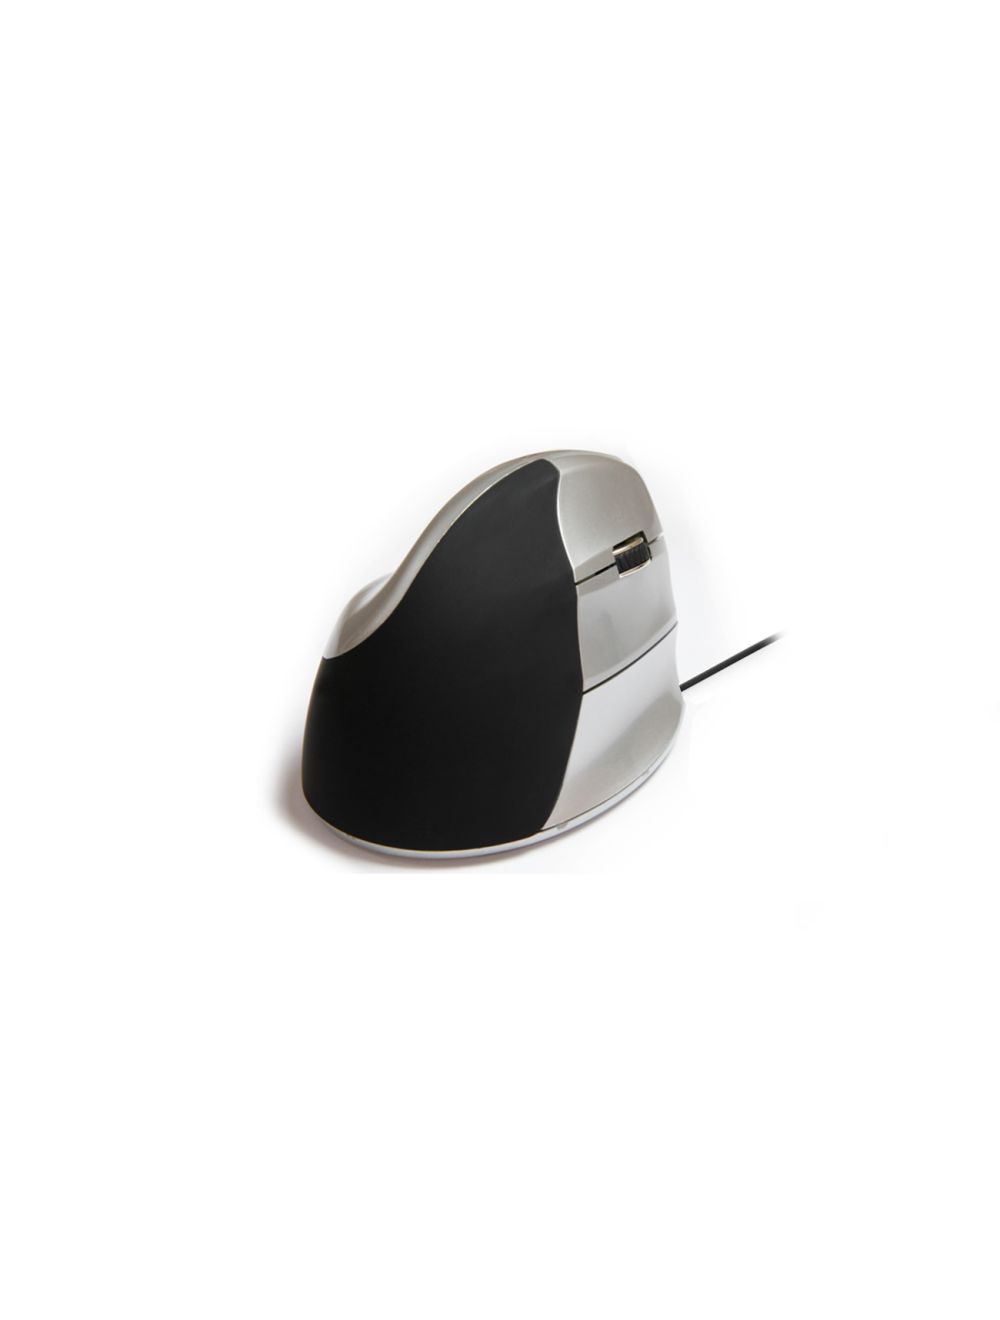 Minicute EZmouse 5 wired